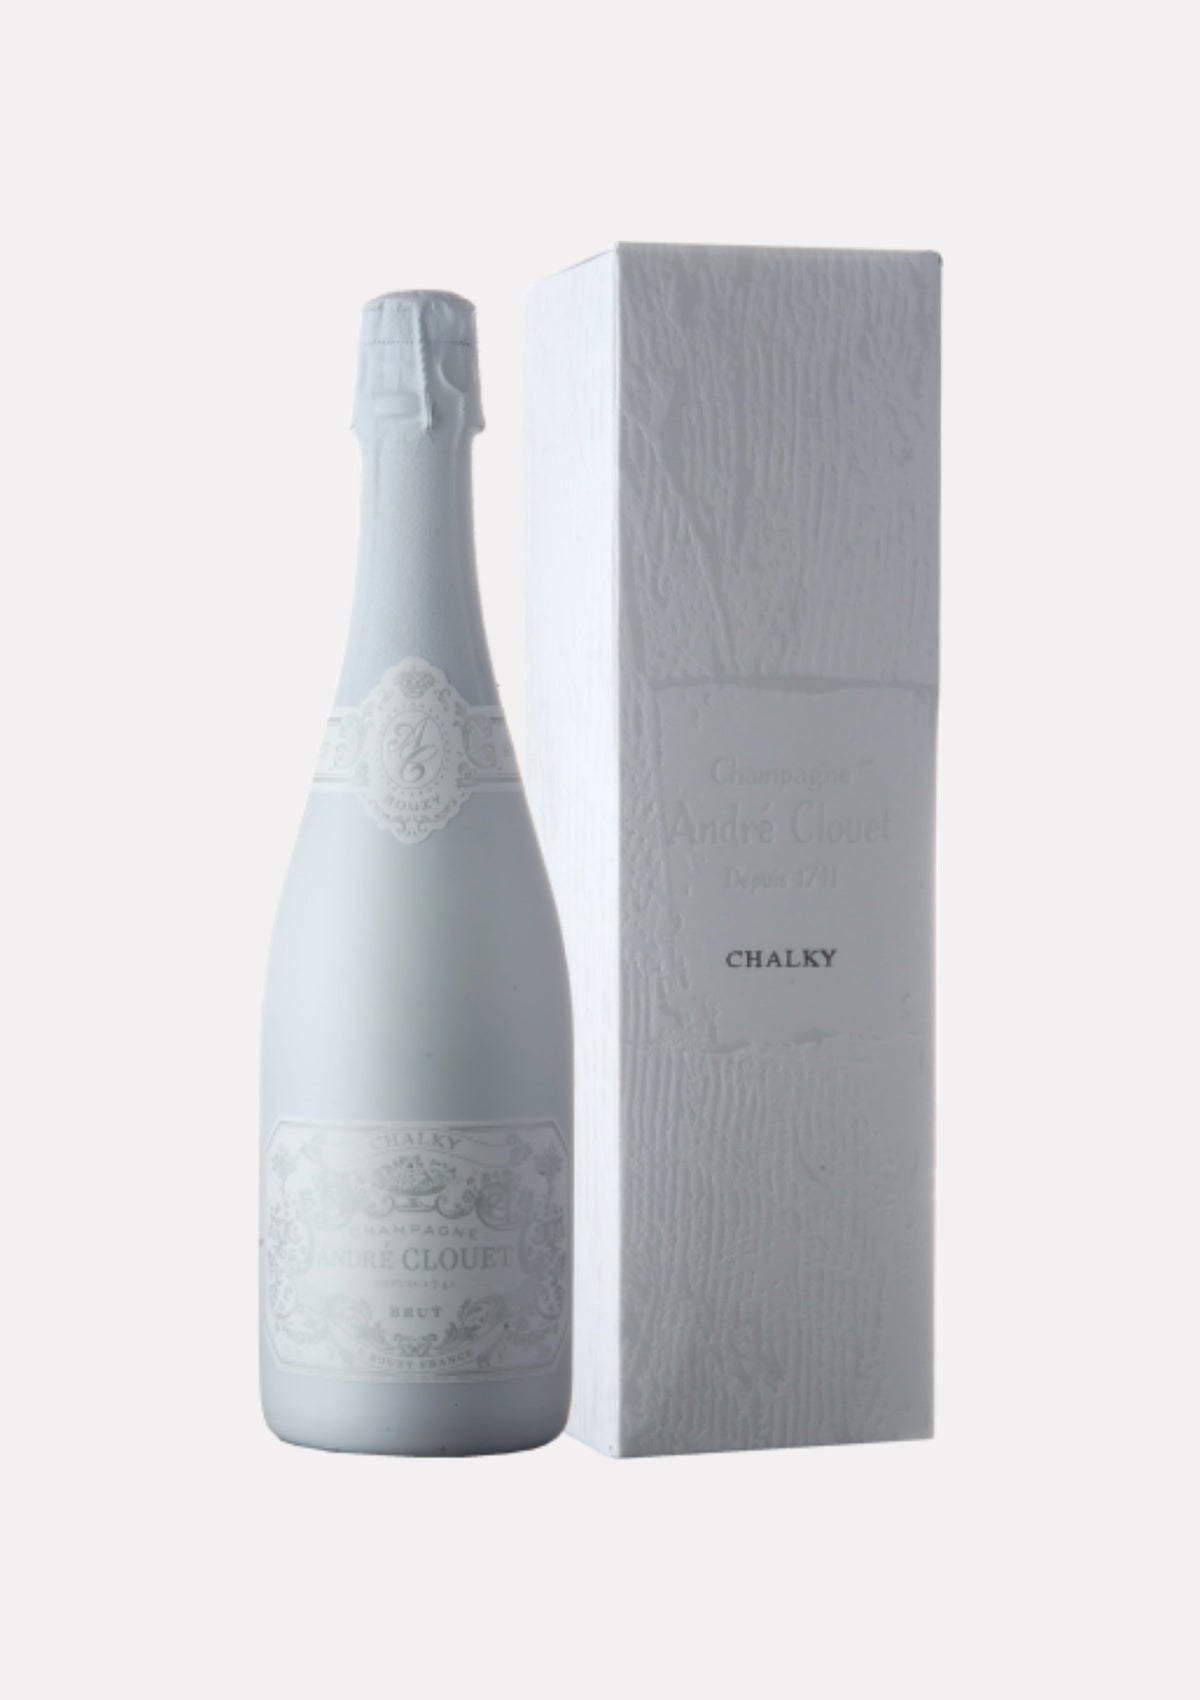 Andre Clouet brut Chalky